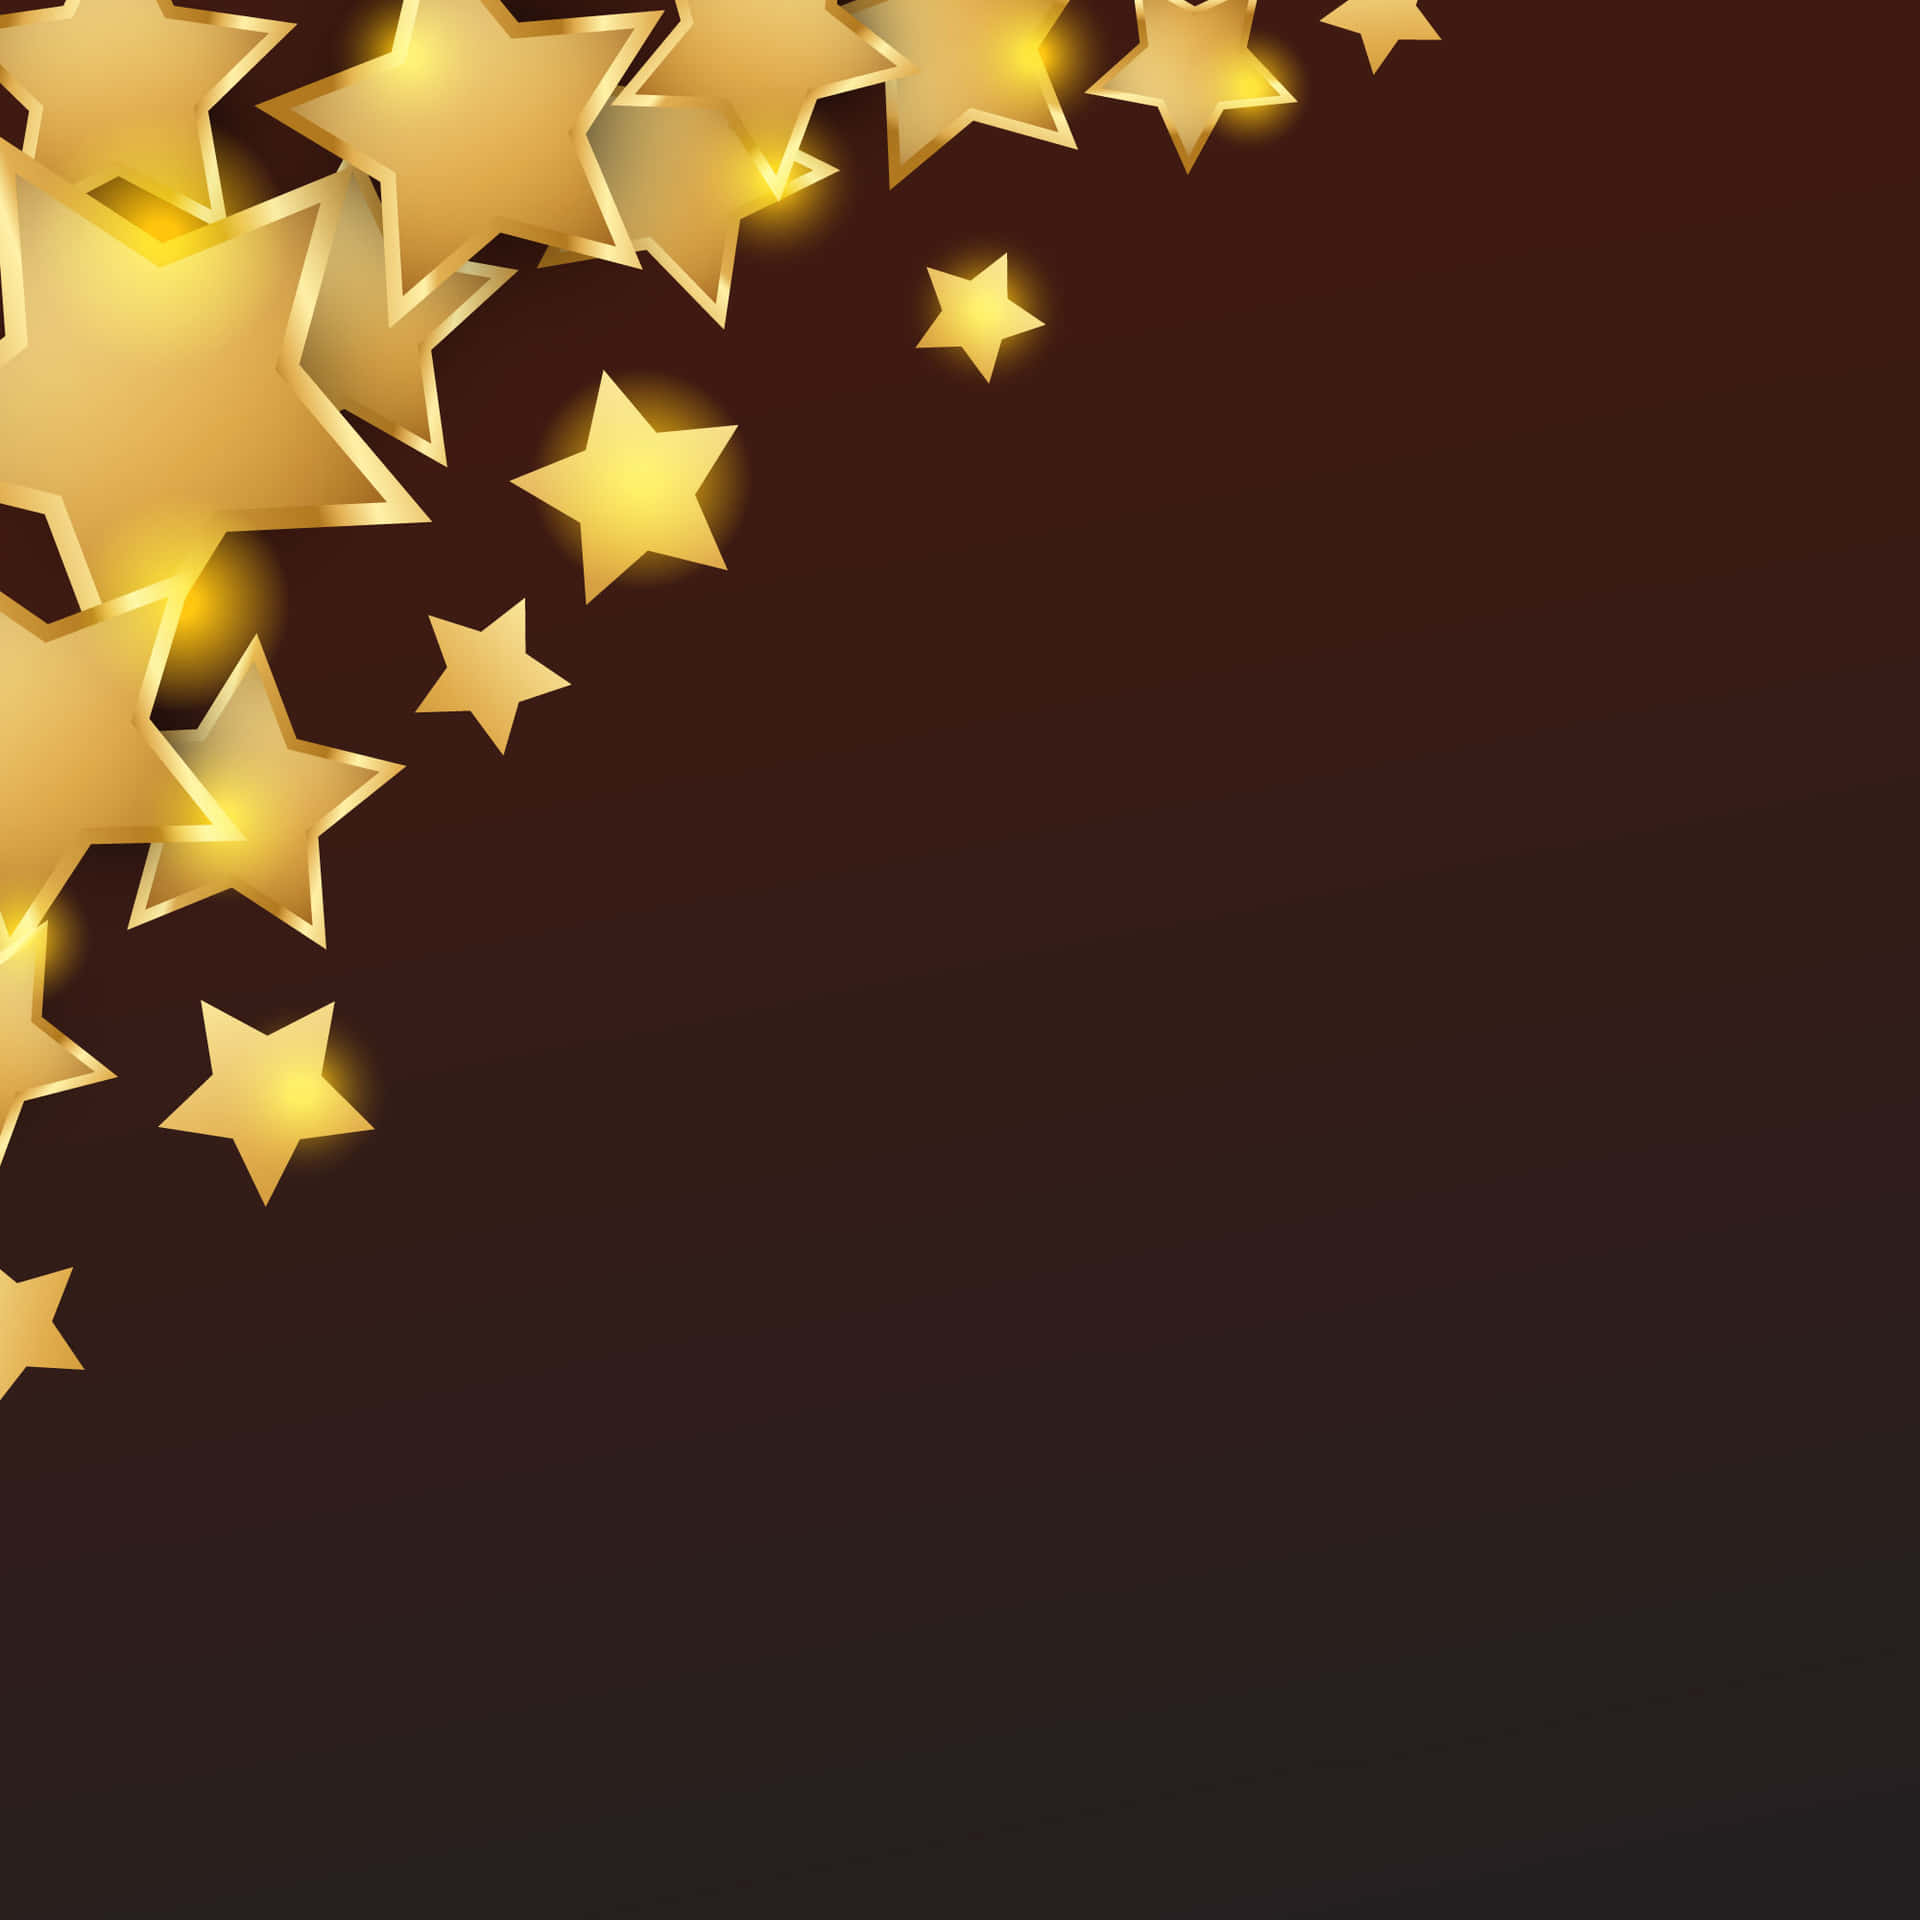 Shine Brightly with Gold Star